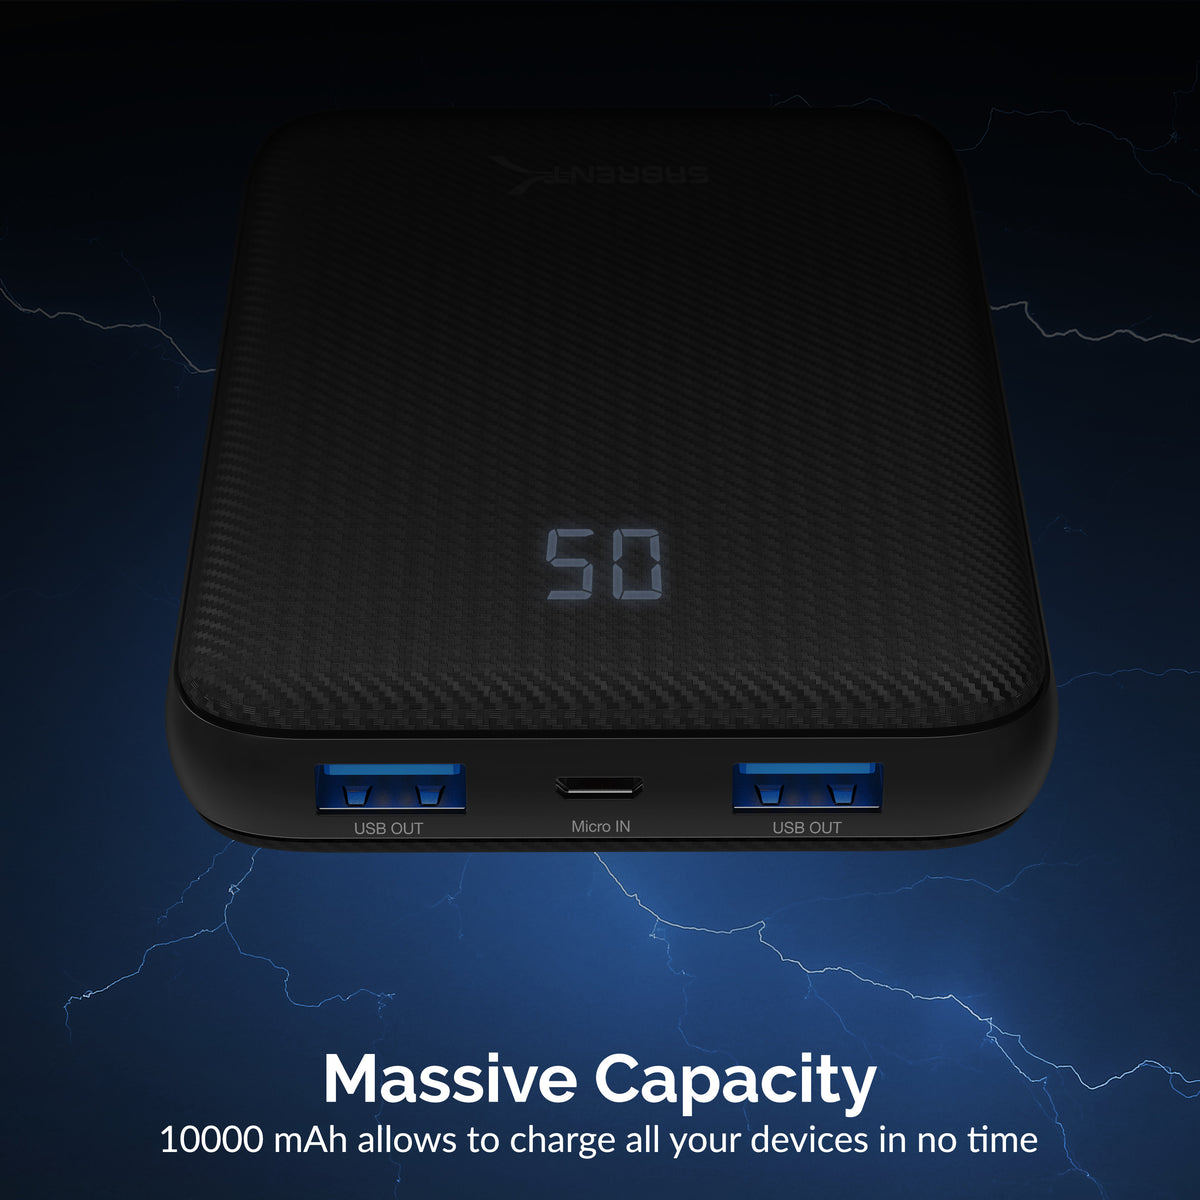 10000 mAh USB C PD Power Bank with Quick Charge 3.0